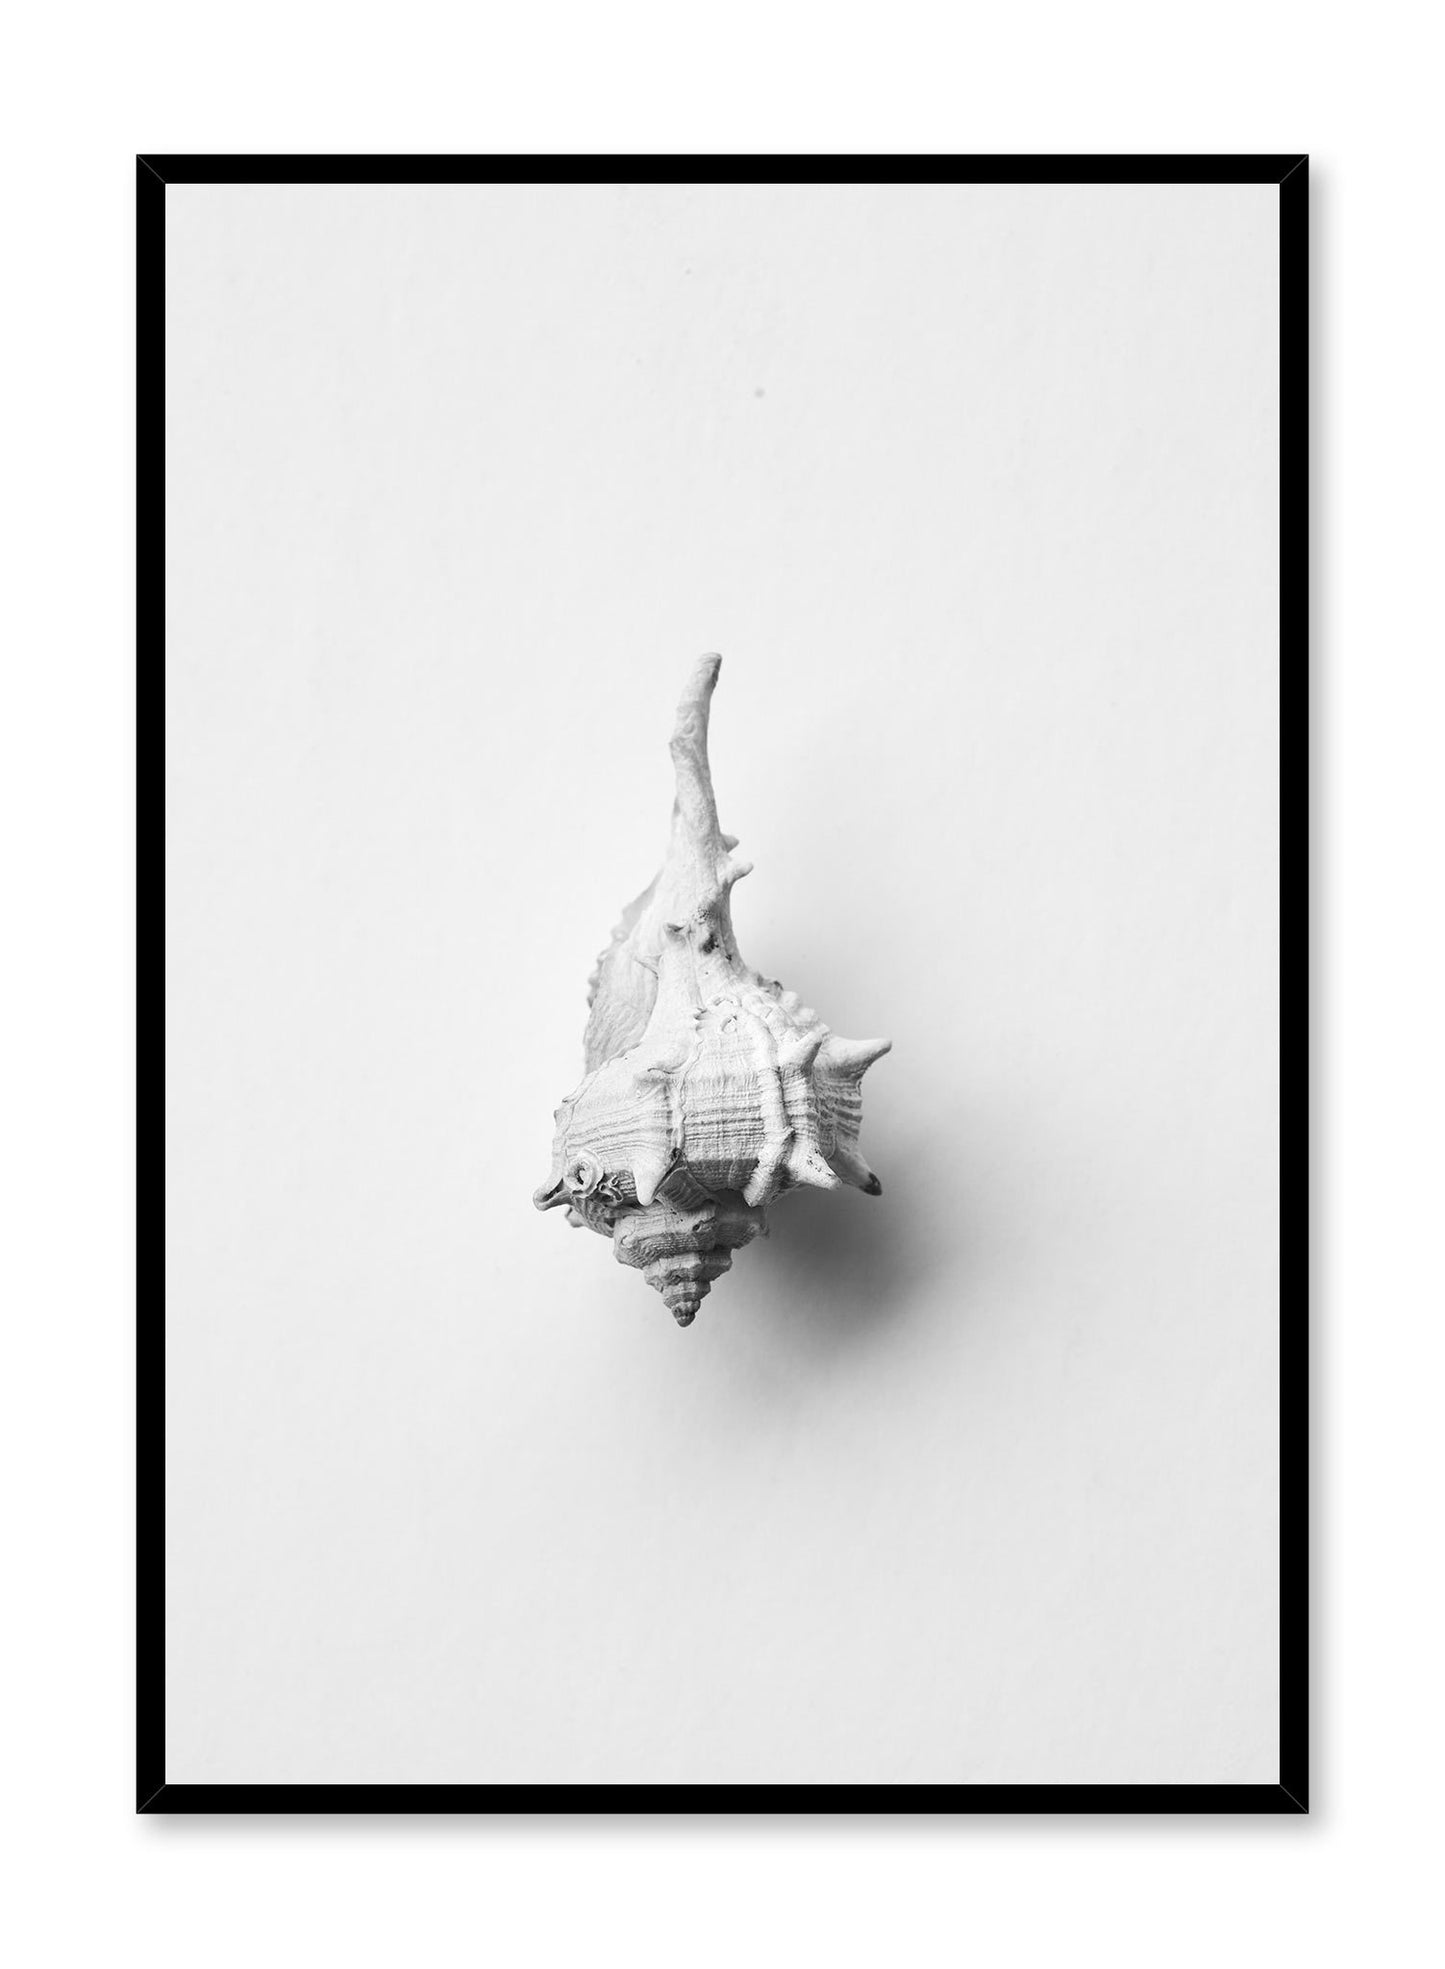 Horse Conch is a minimalist photography of a close-up shot of a white horse conch facing downwards by Opposite Wall.